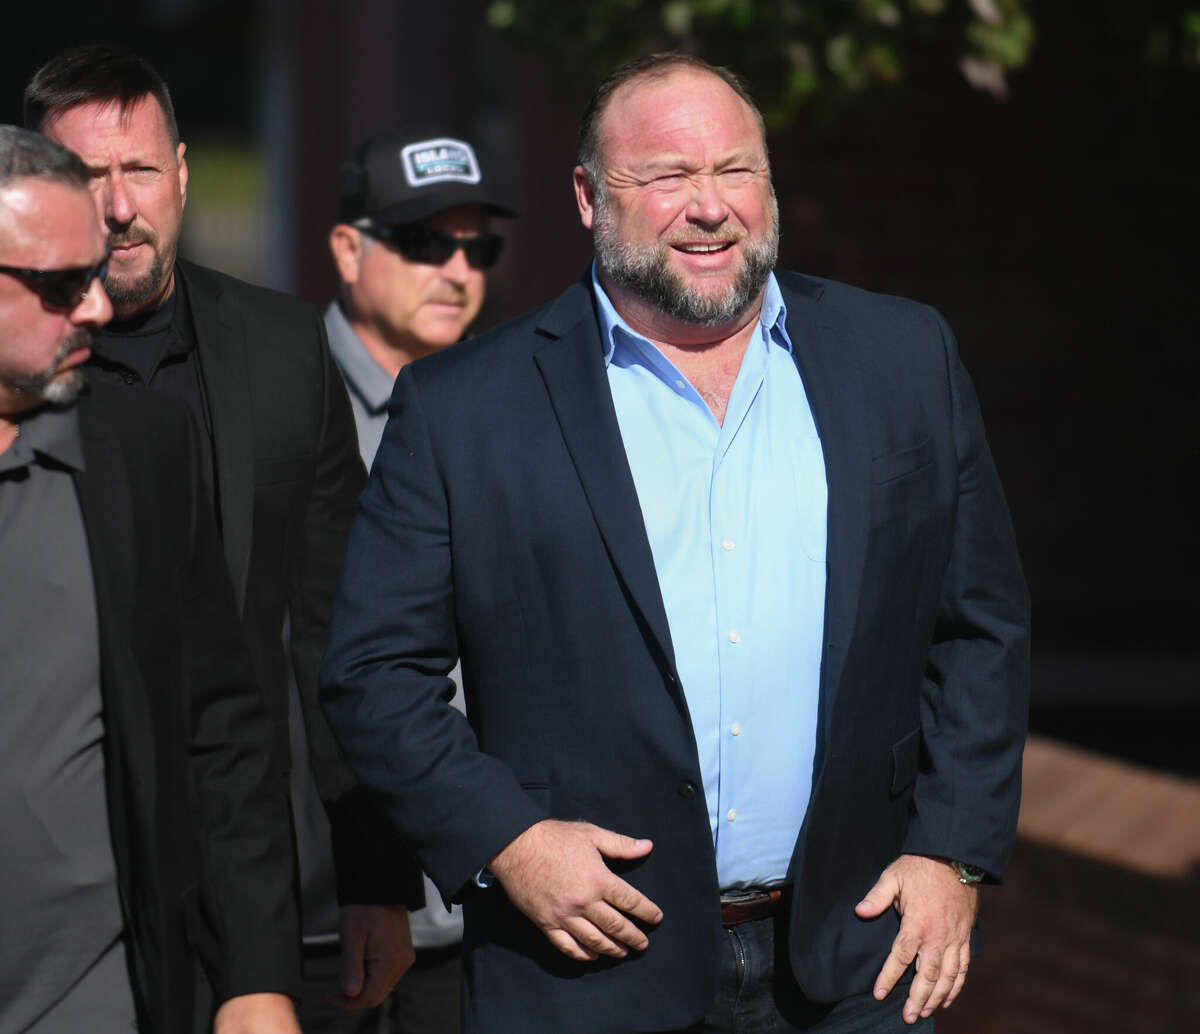 Alex Jones, right, enters court with members of his security team and speaks to the media before attending day five of the Sandy Hook defamation damages trial at Connecticut Superior Court in Waterbury, Conn. Tuesday, Sept. 20, 2022.